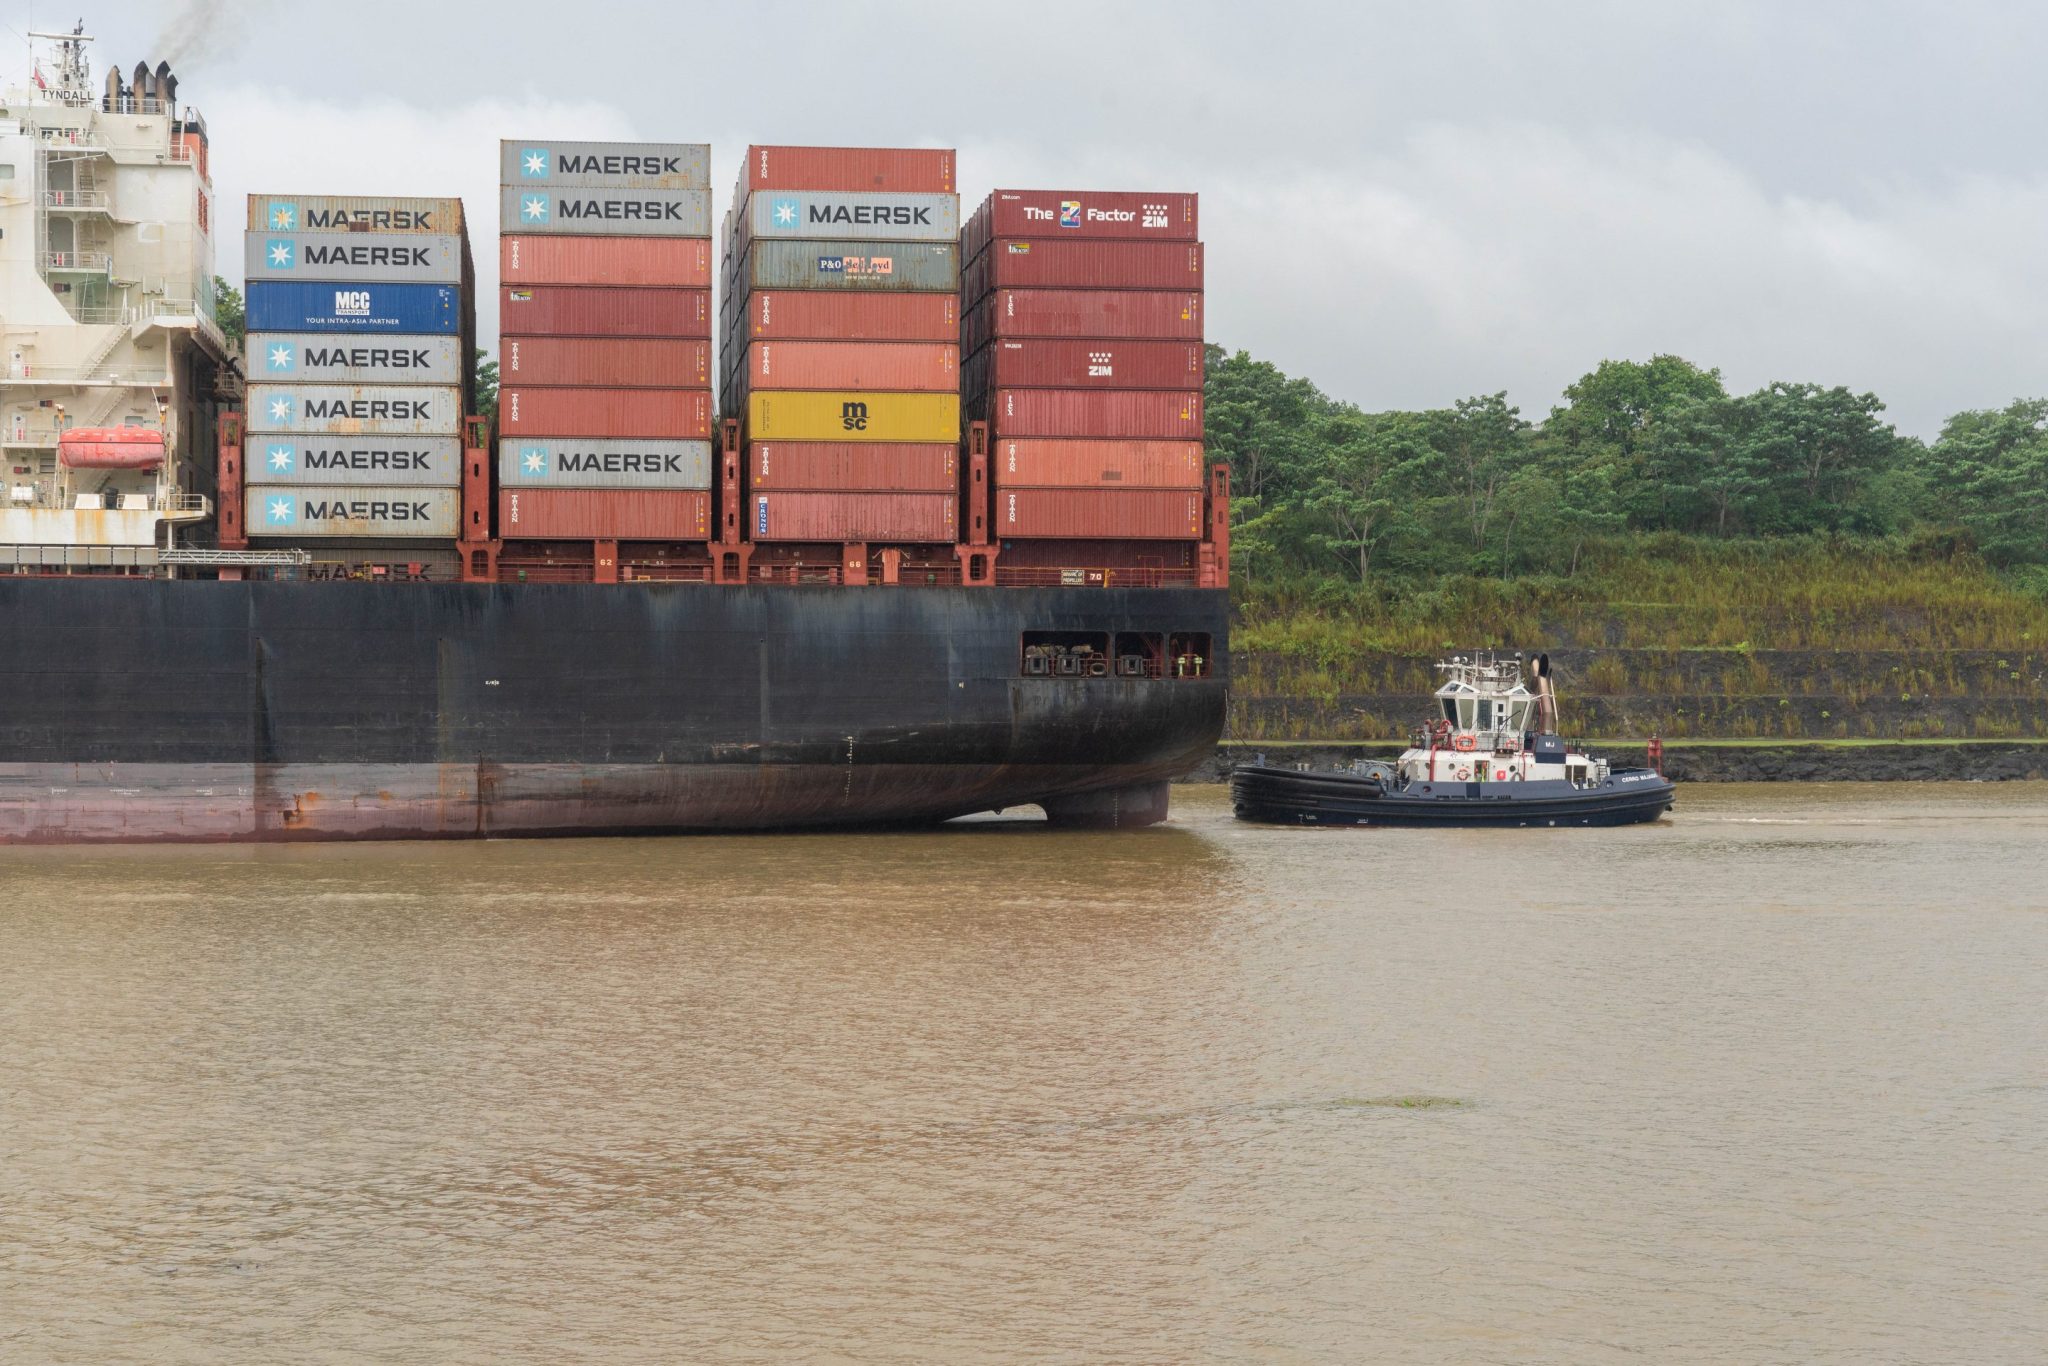 The Panama Canal is enmeshed in a crisis that’s disrupting global trade. But it will take years and billions of dollars to fix